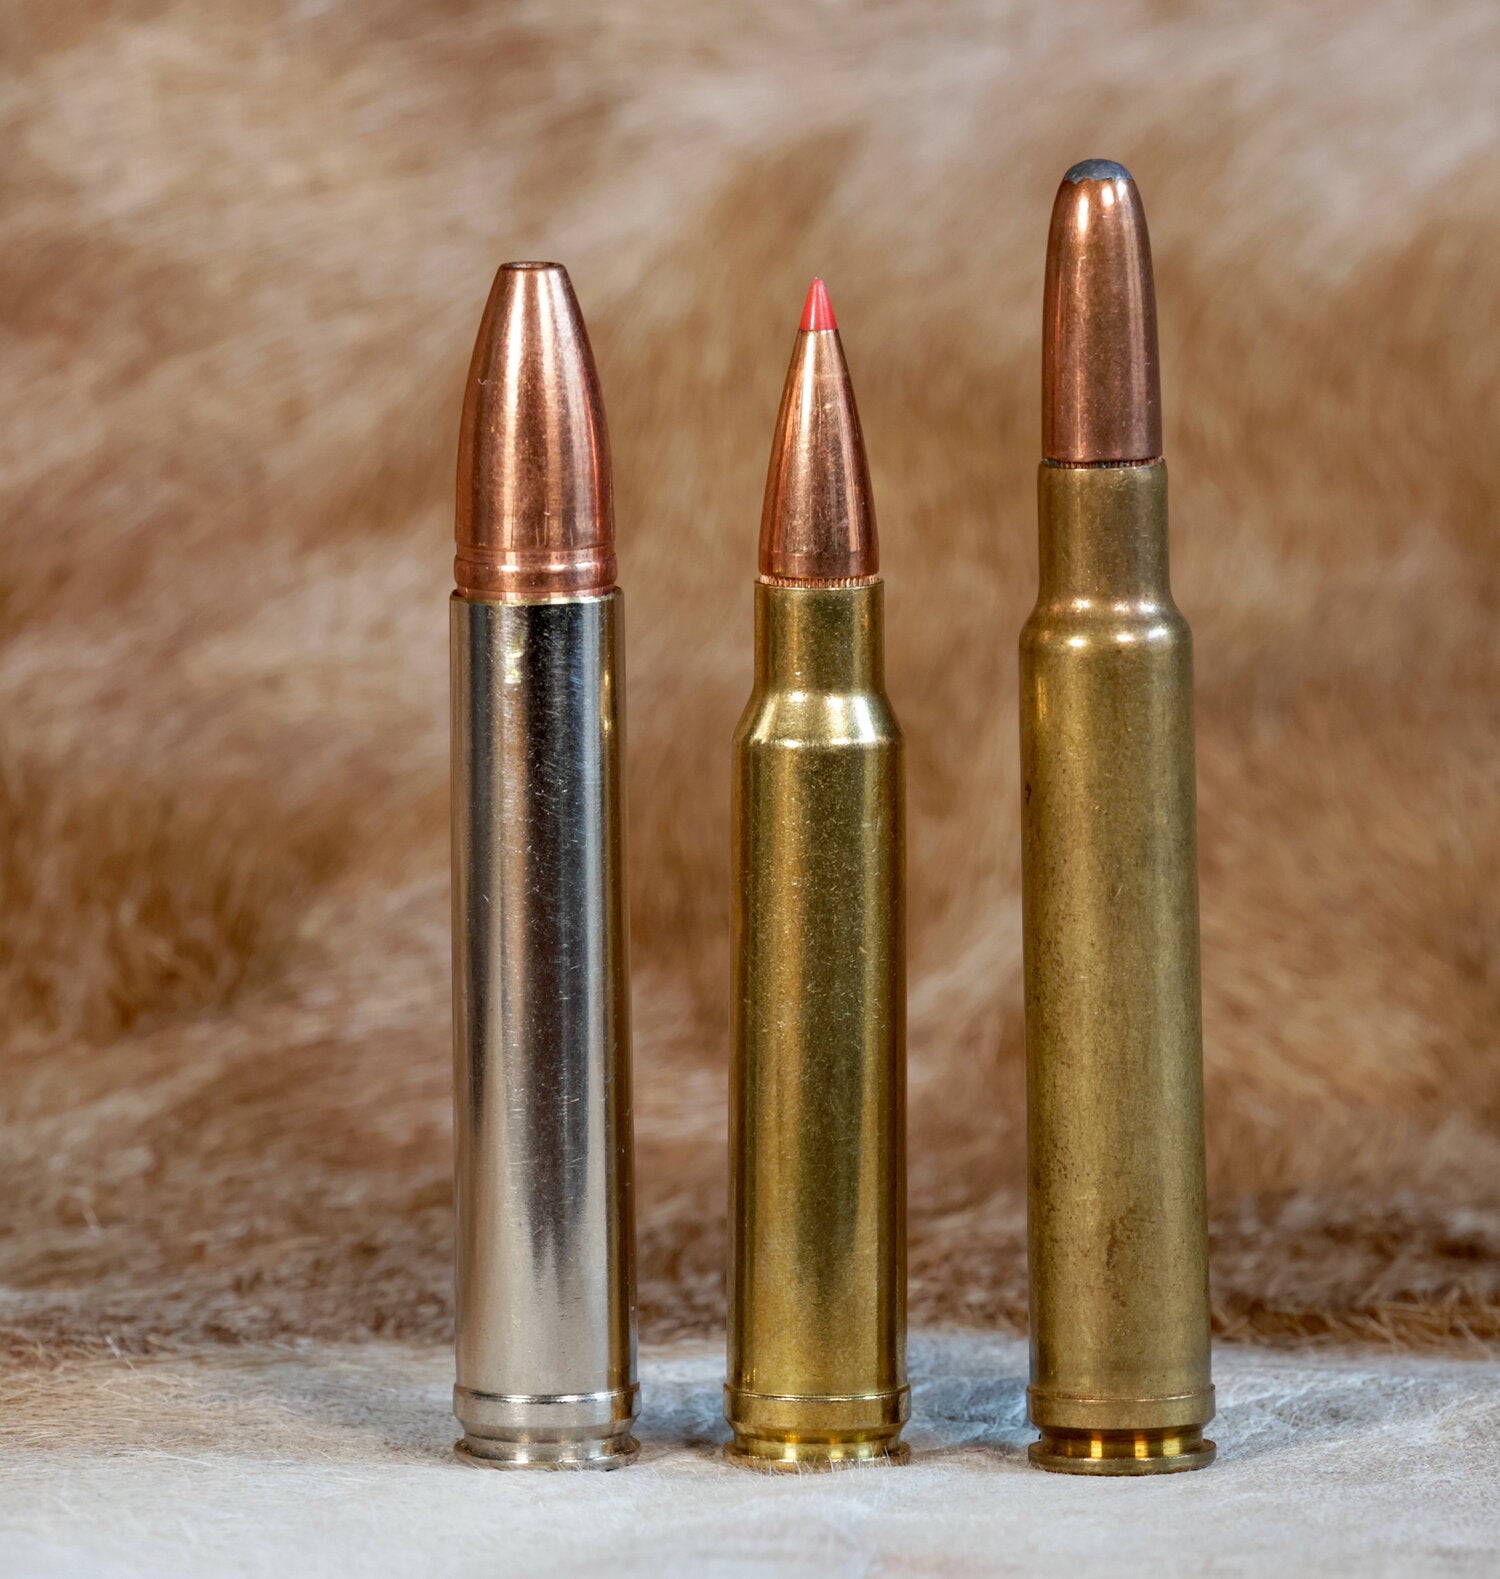  .338 Win. Mag Review: Pros and cons of the .338 Win. Mag